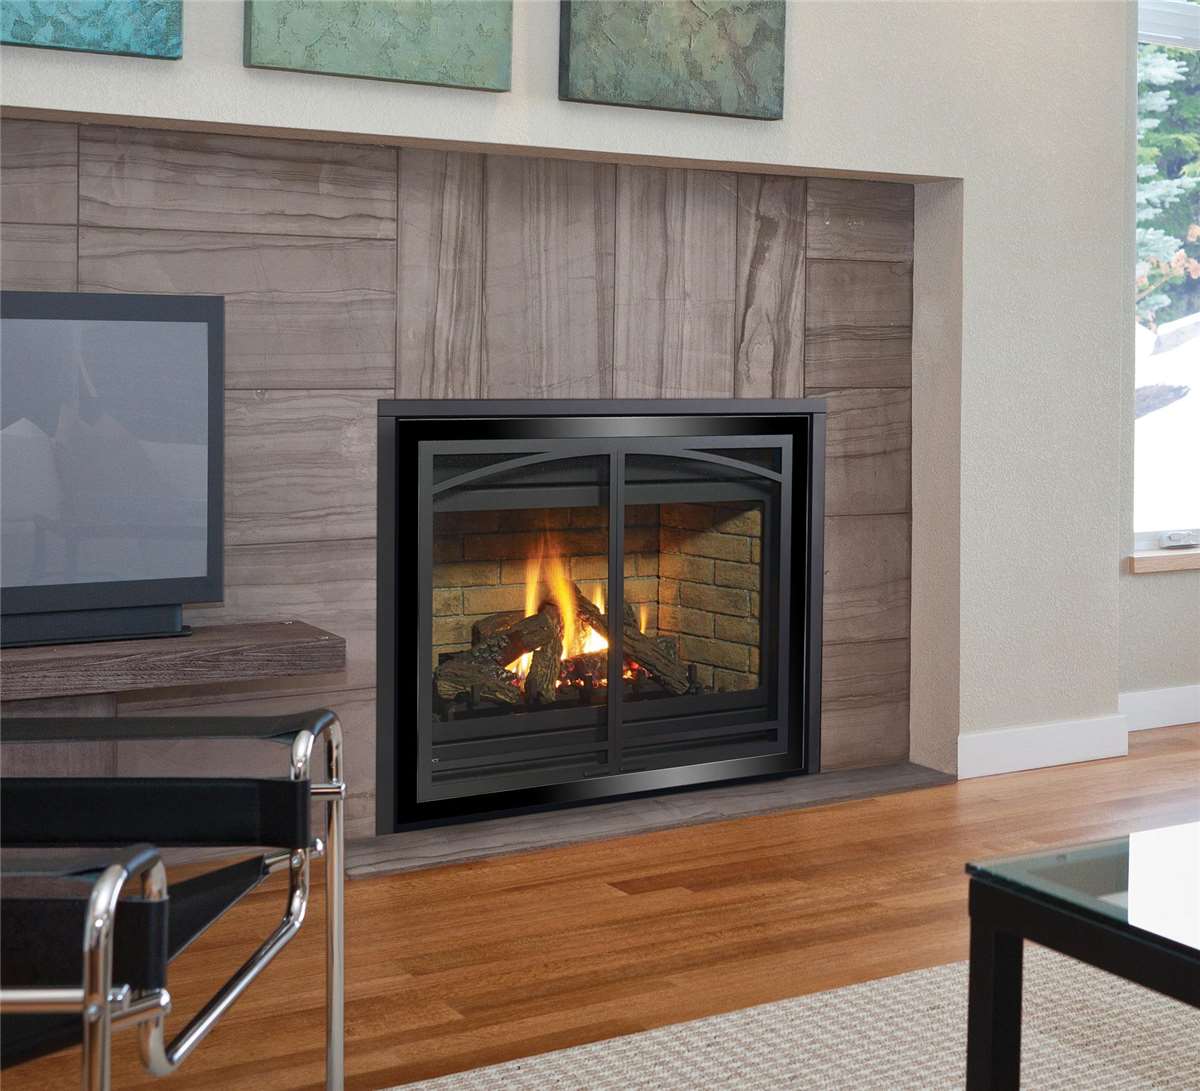 Regency Panorama P36 gas fireplace with black chrome faceplate and door inlay.